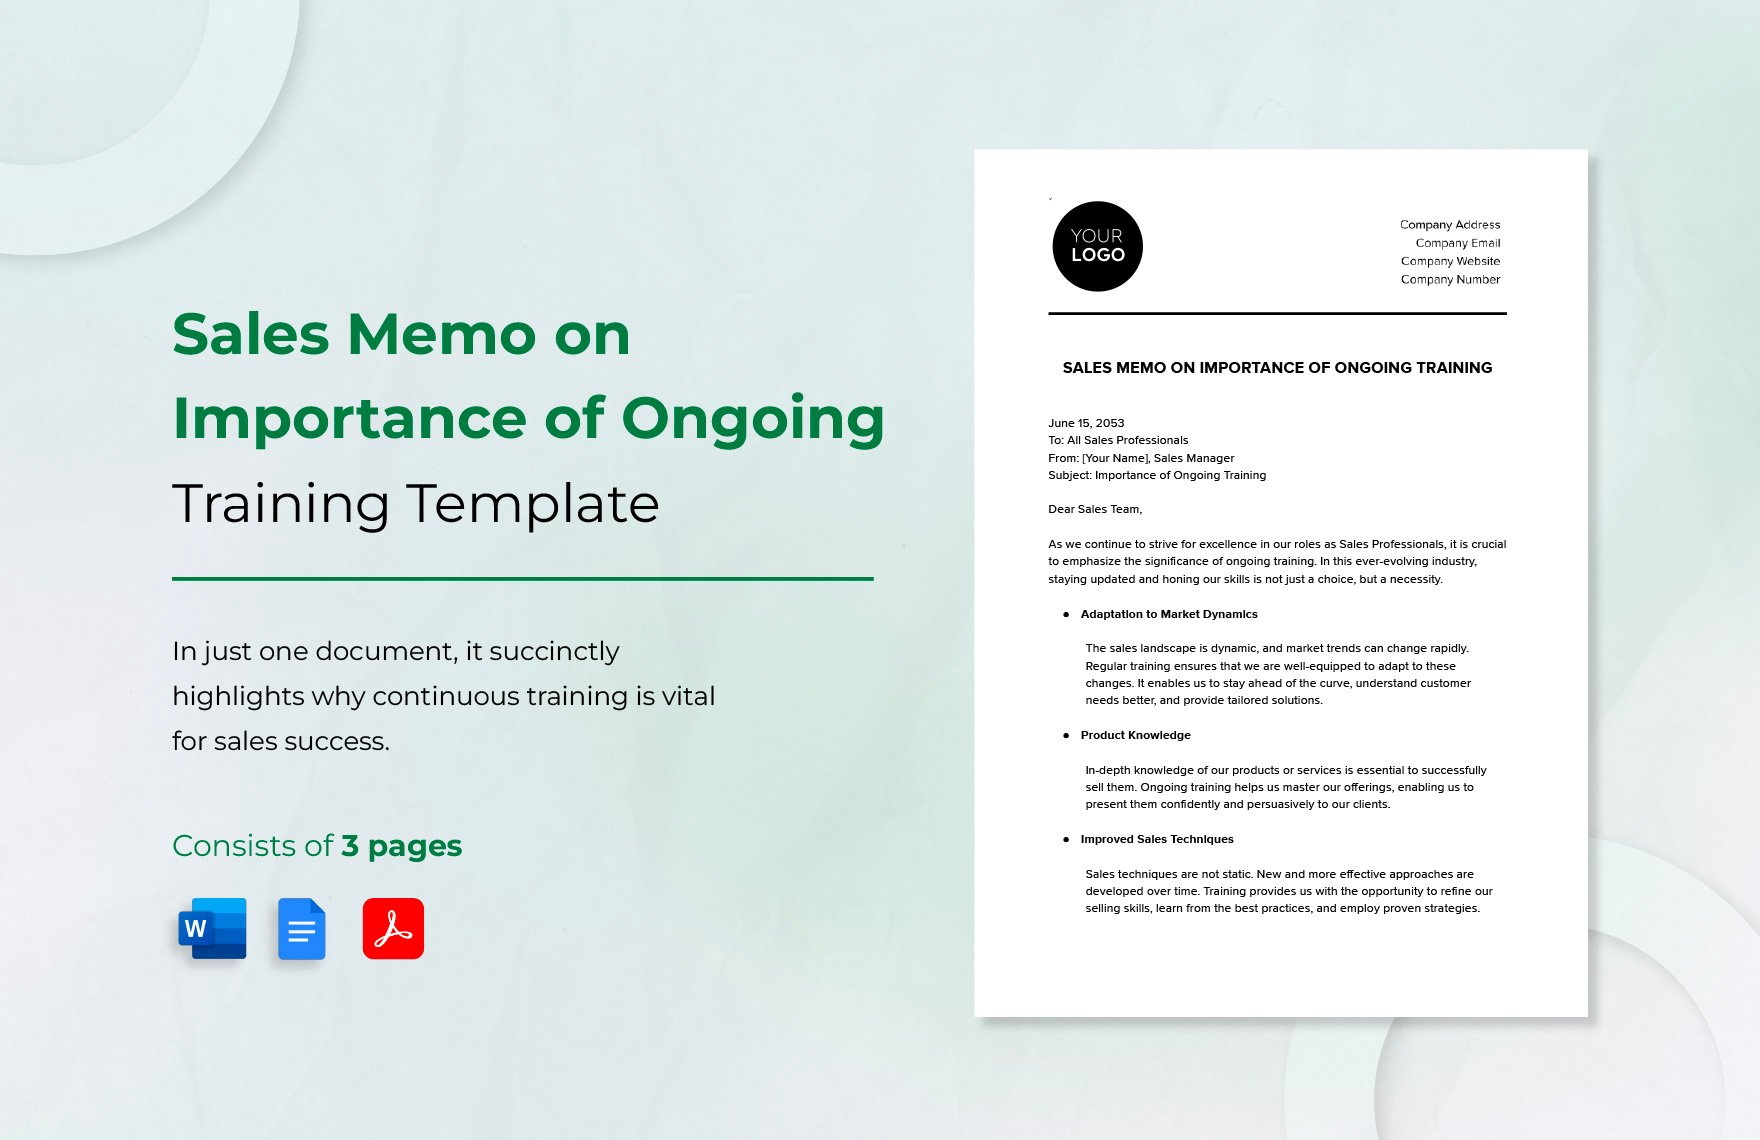 Sales Memo on Importance of Ongoing Training Template